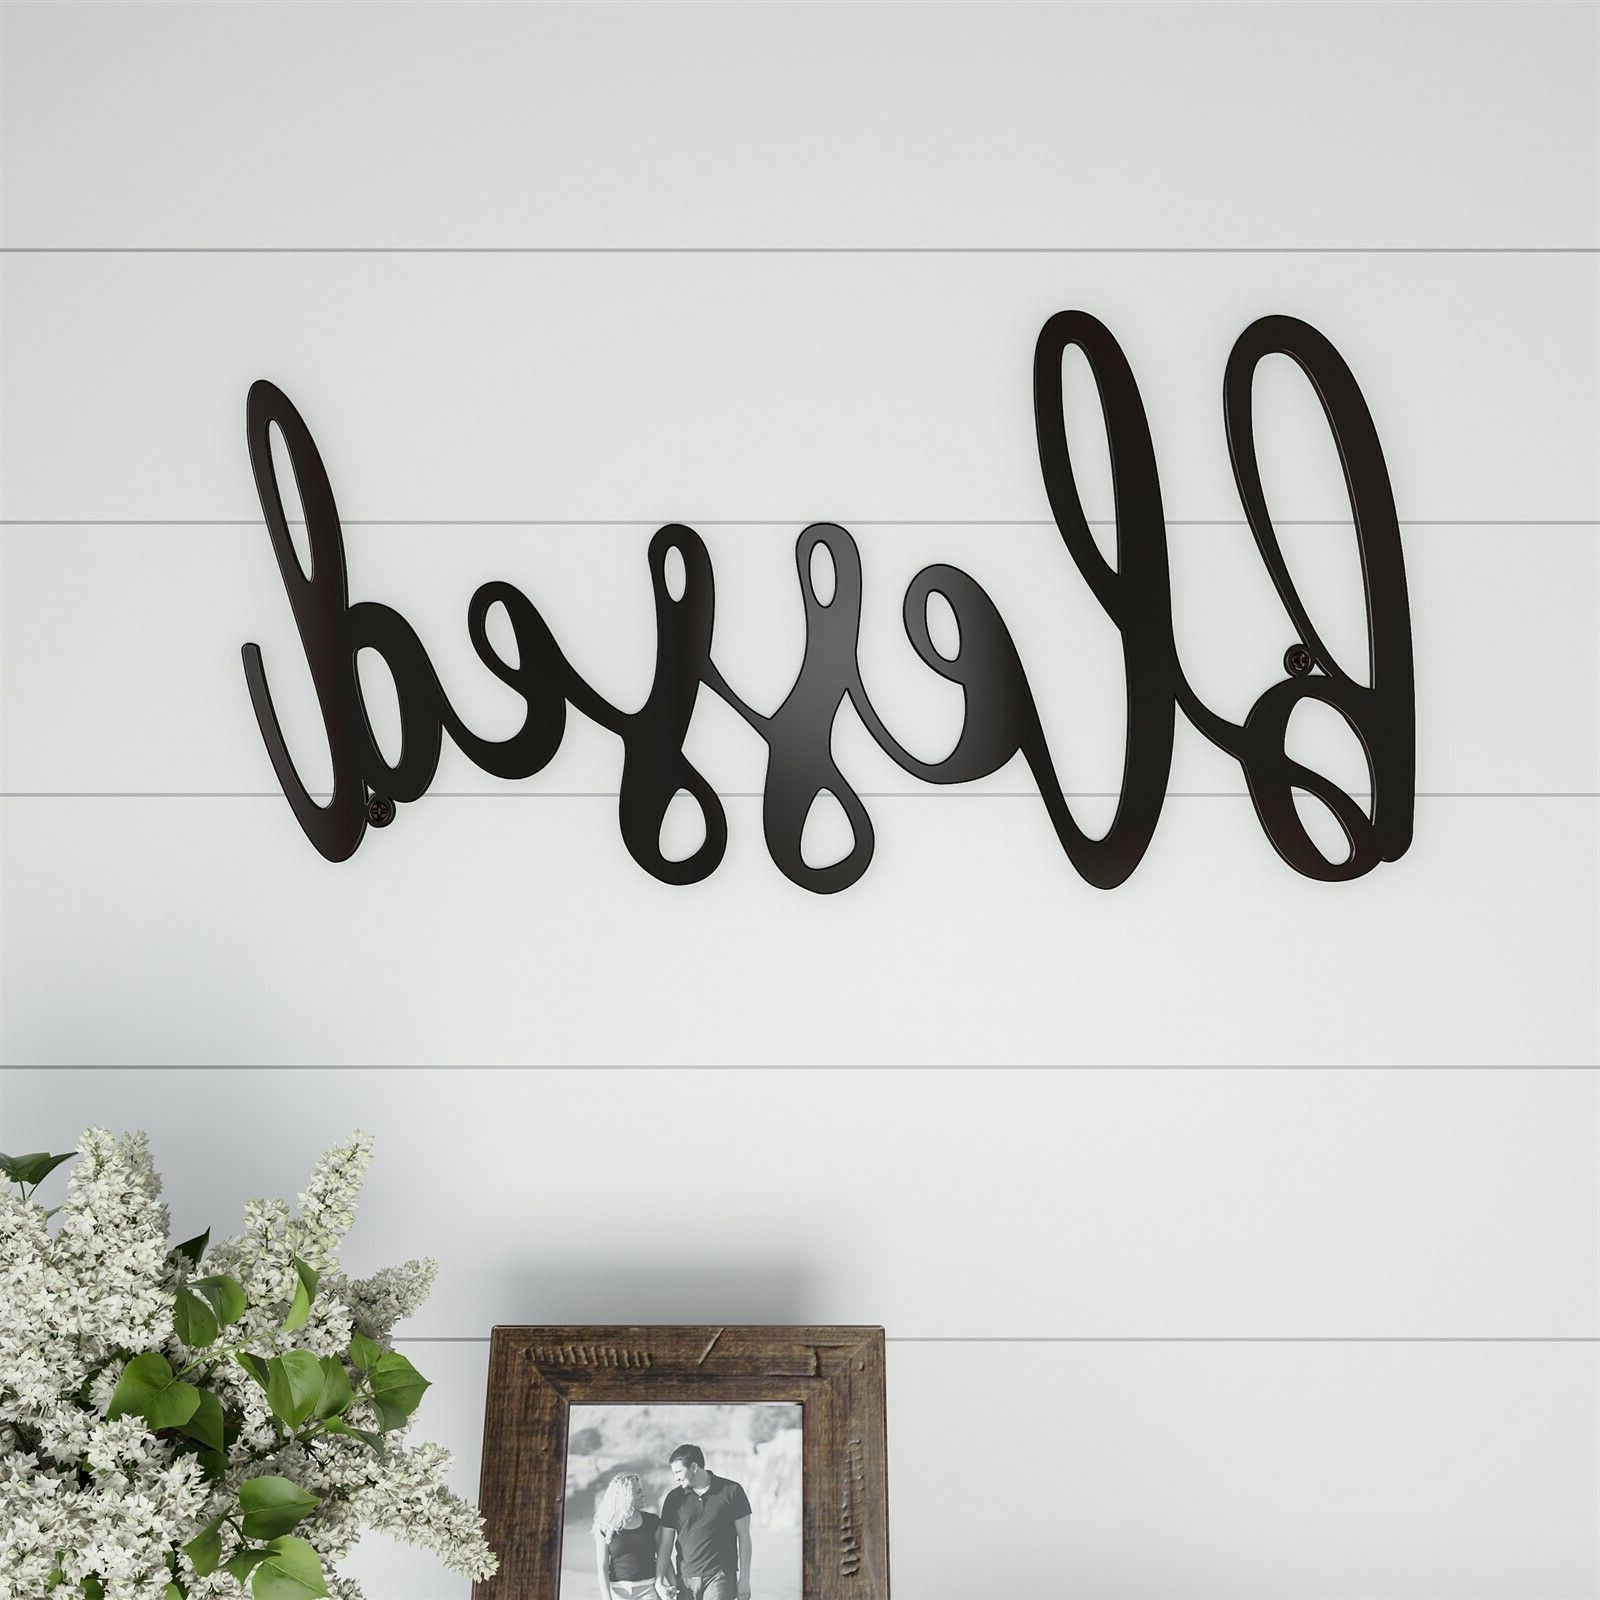 2019 Blessed In Cursive Rustic Metal Cutout Sign 3d Look Wall Hanging Decor 22 X  10 With Choose Happiness 3d Cursive Metal Wall Décor (View 3 of 20)